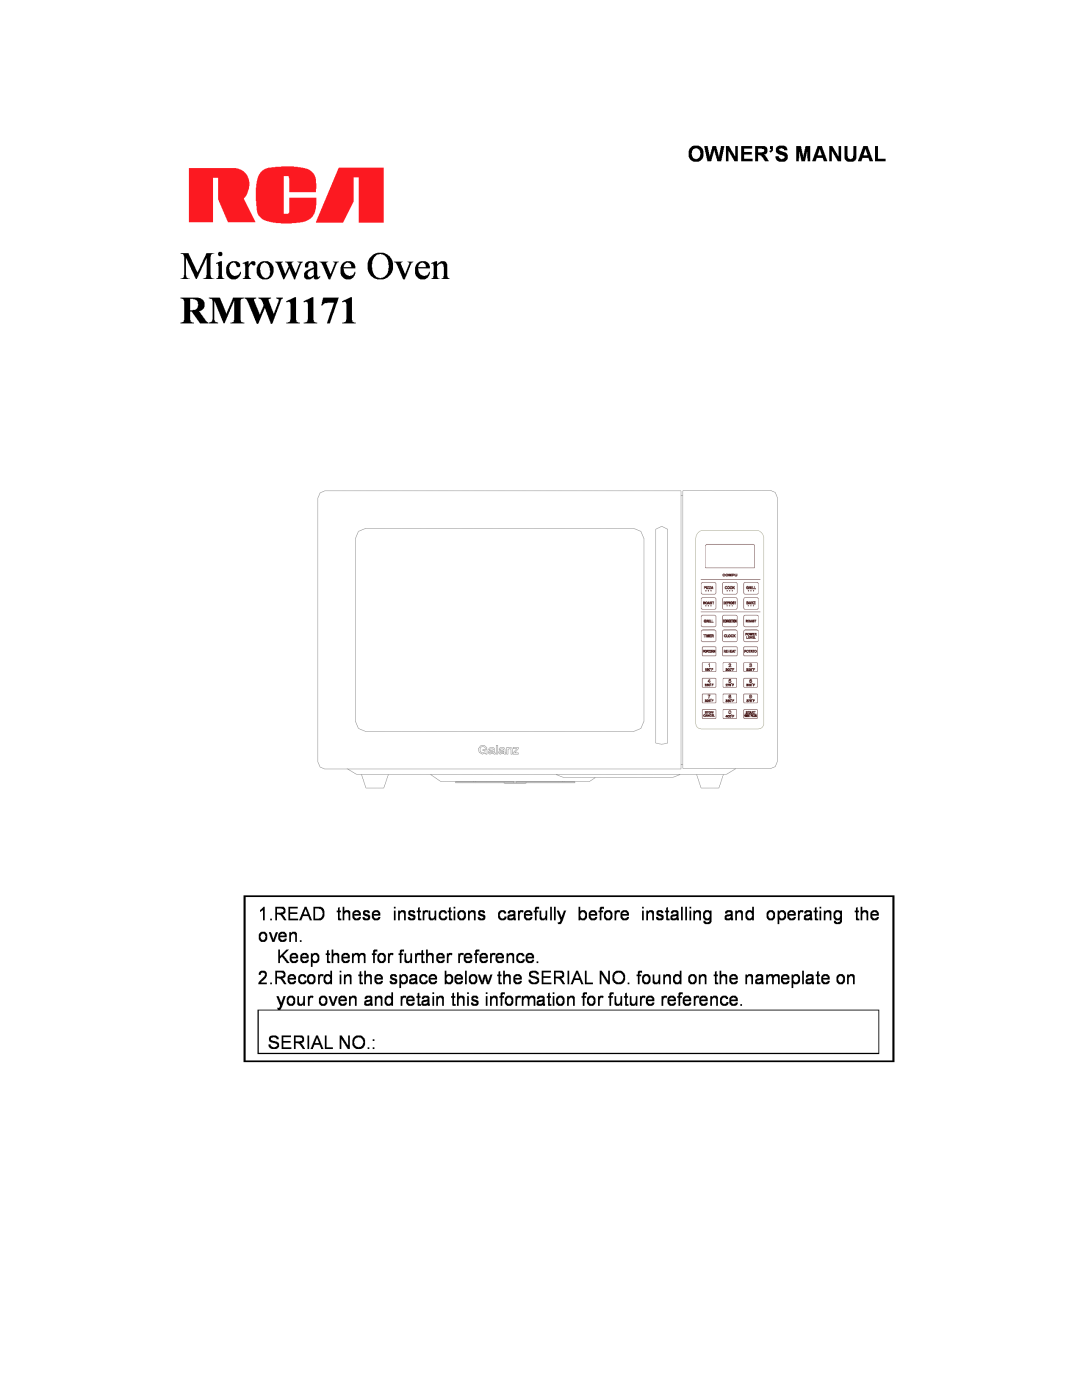 RCA RMW1171 owner manual Microwave Oven, Owner’S Manual 